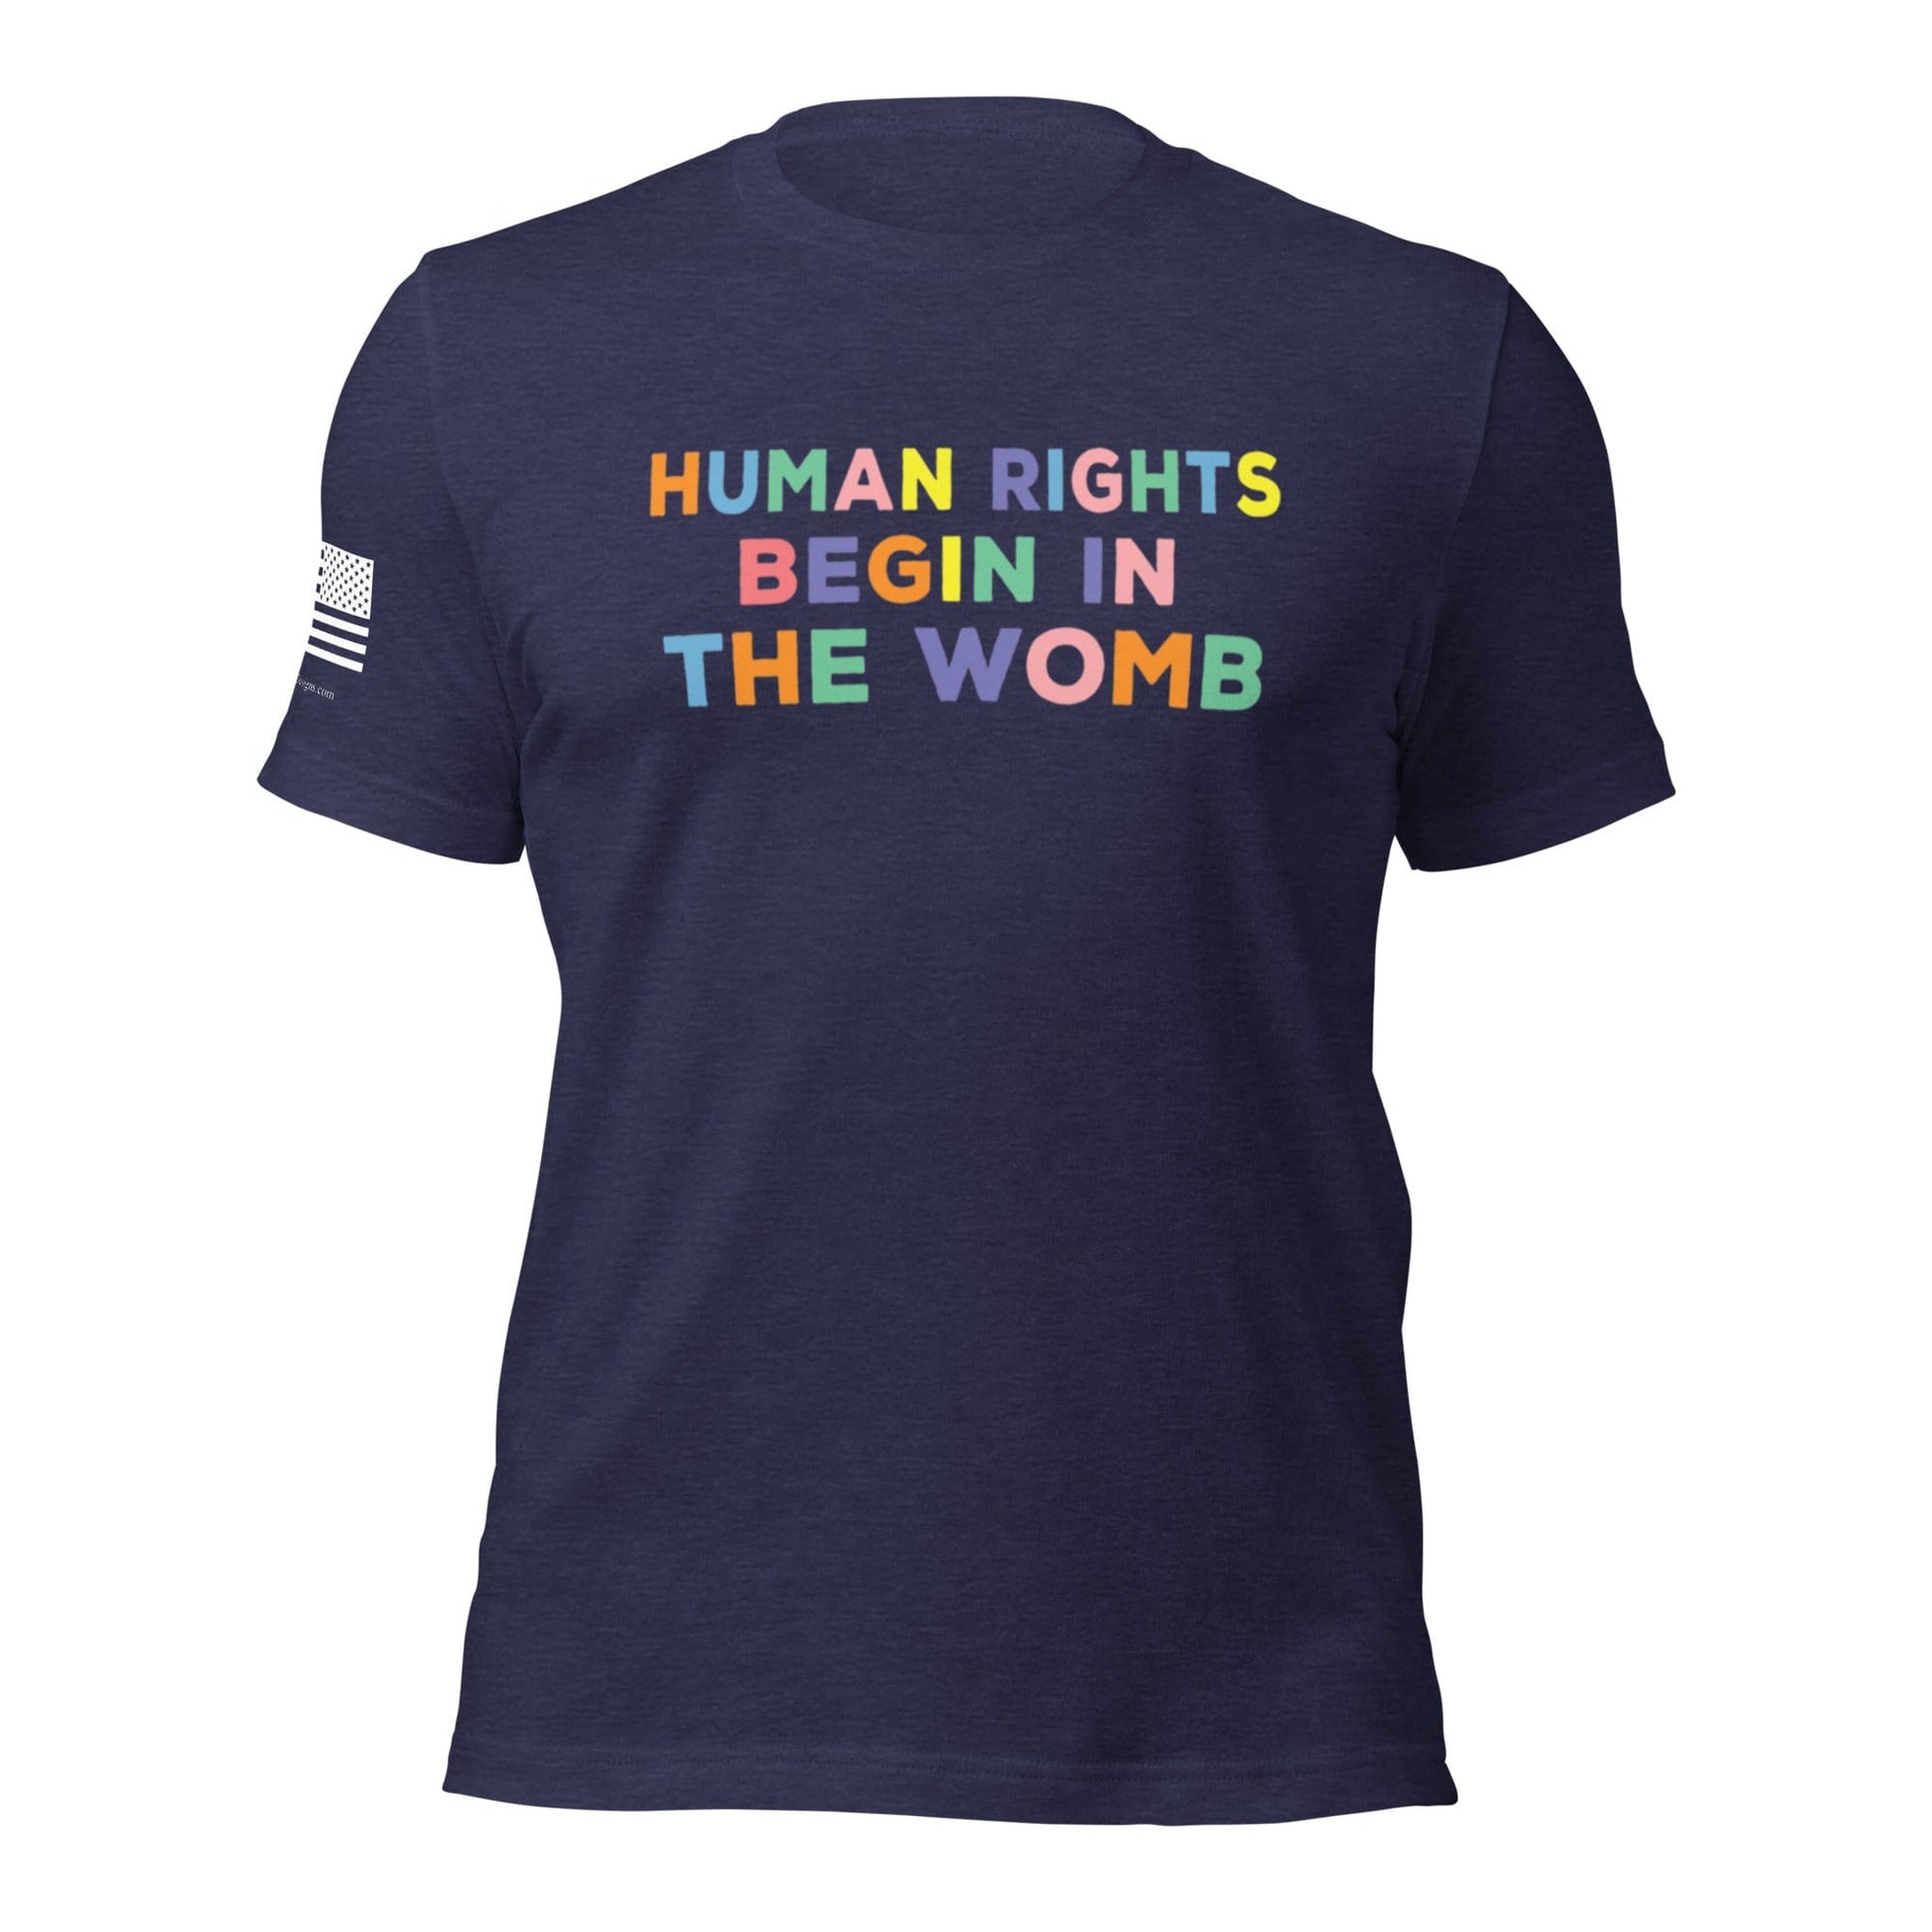 FreedomKat Designs, LLC Heather Midnight Navy / S Human Rights Begin In The Womb